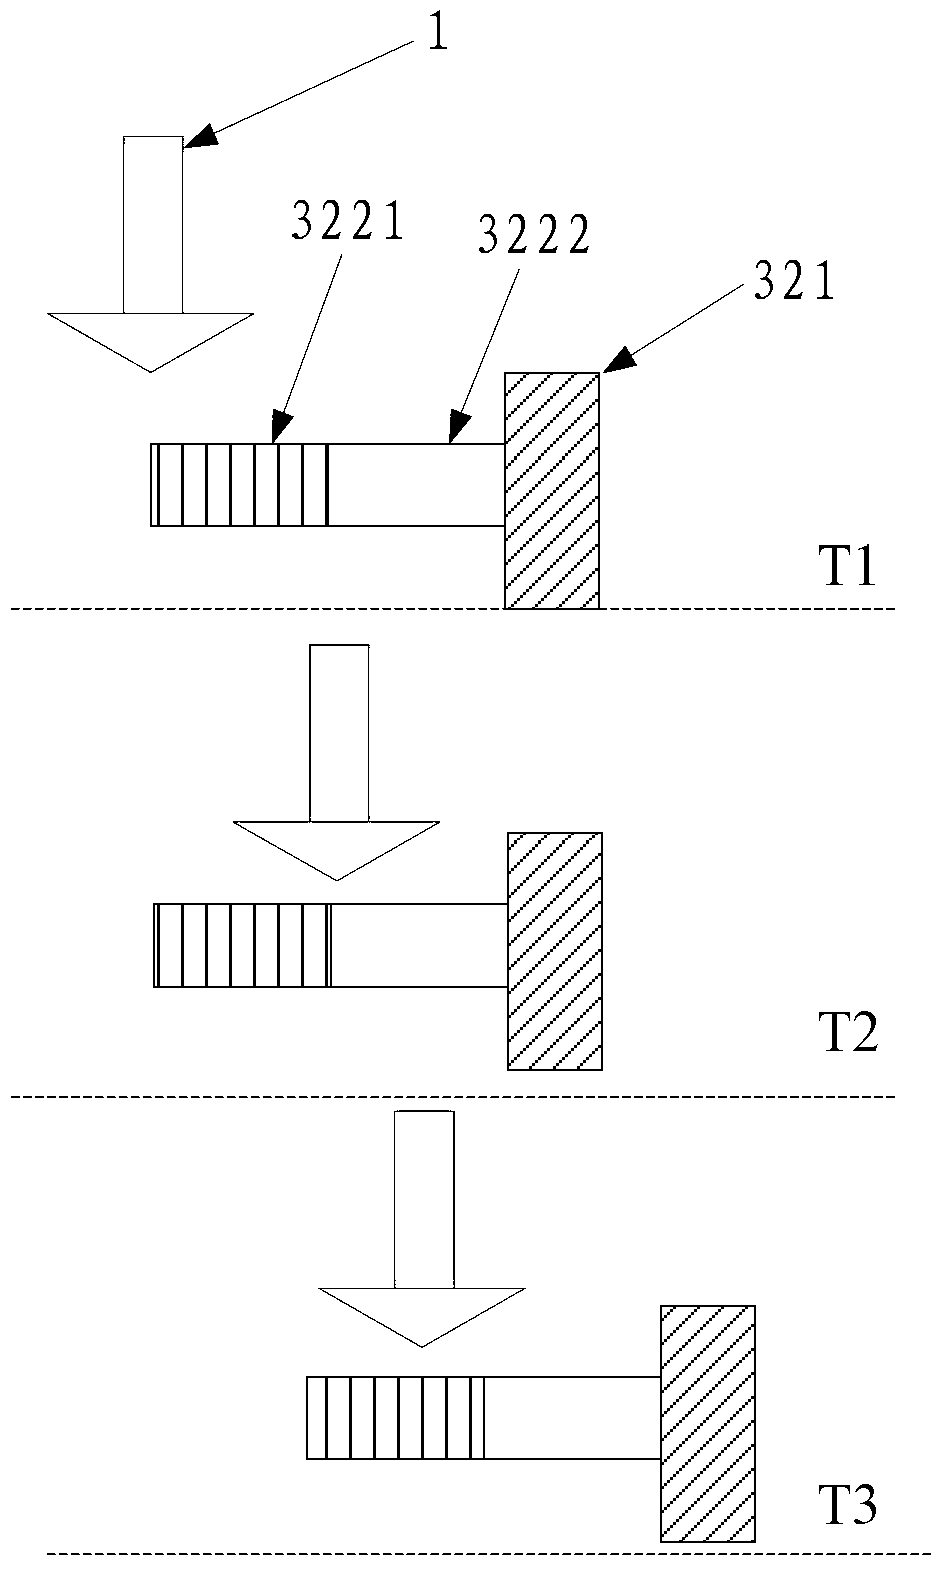 Exposure device and method